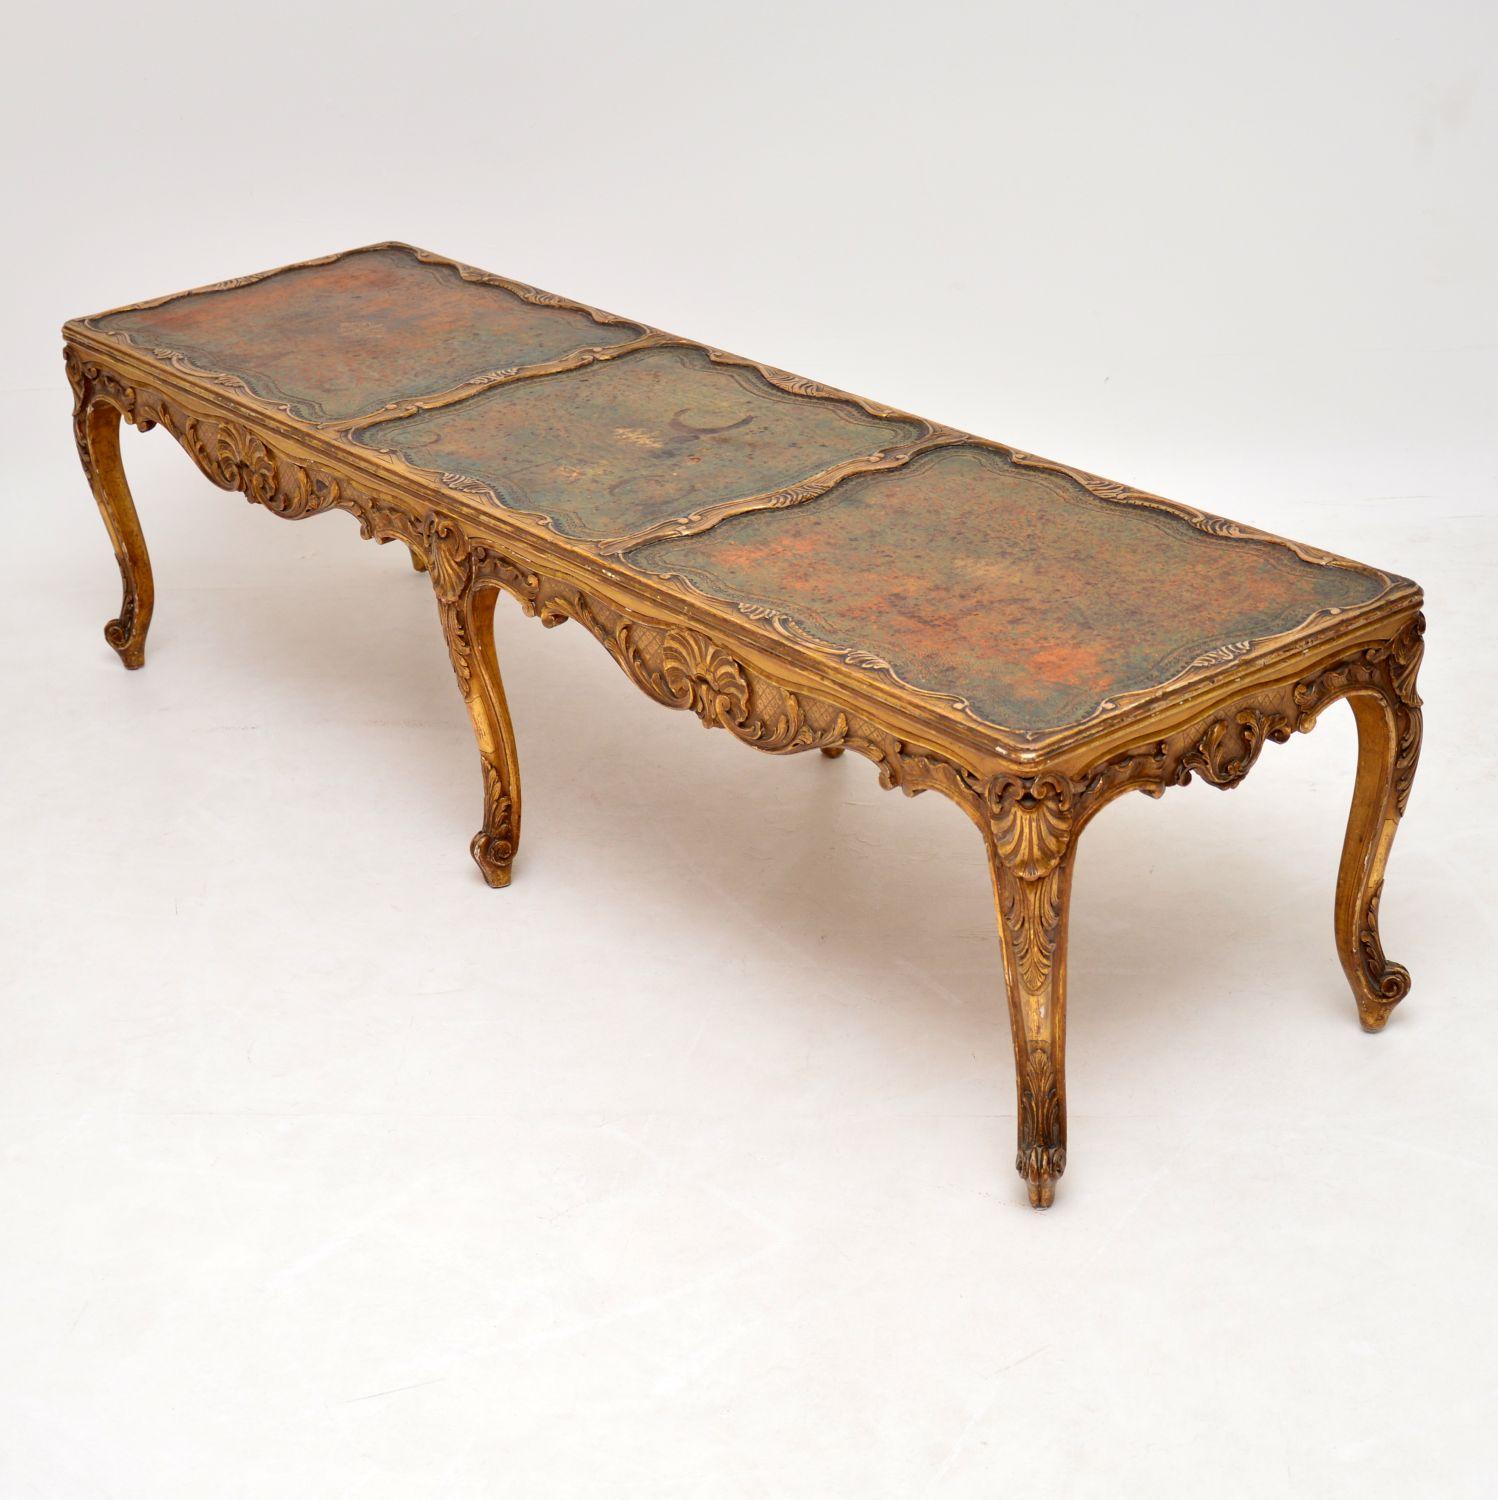 Edwardian Antique French Giltwood and Leather Coffee Table